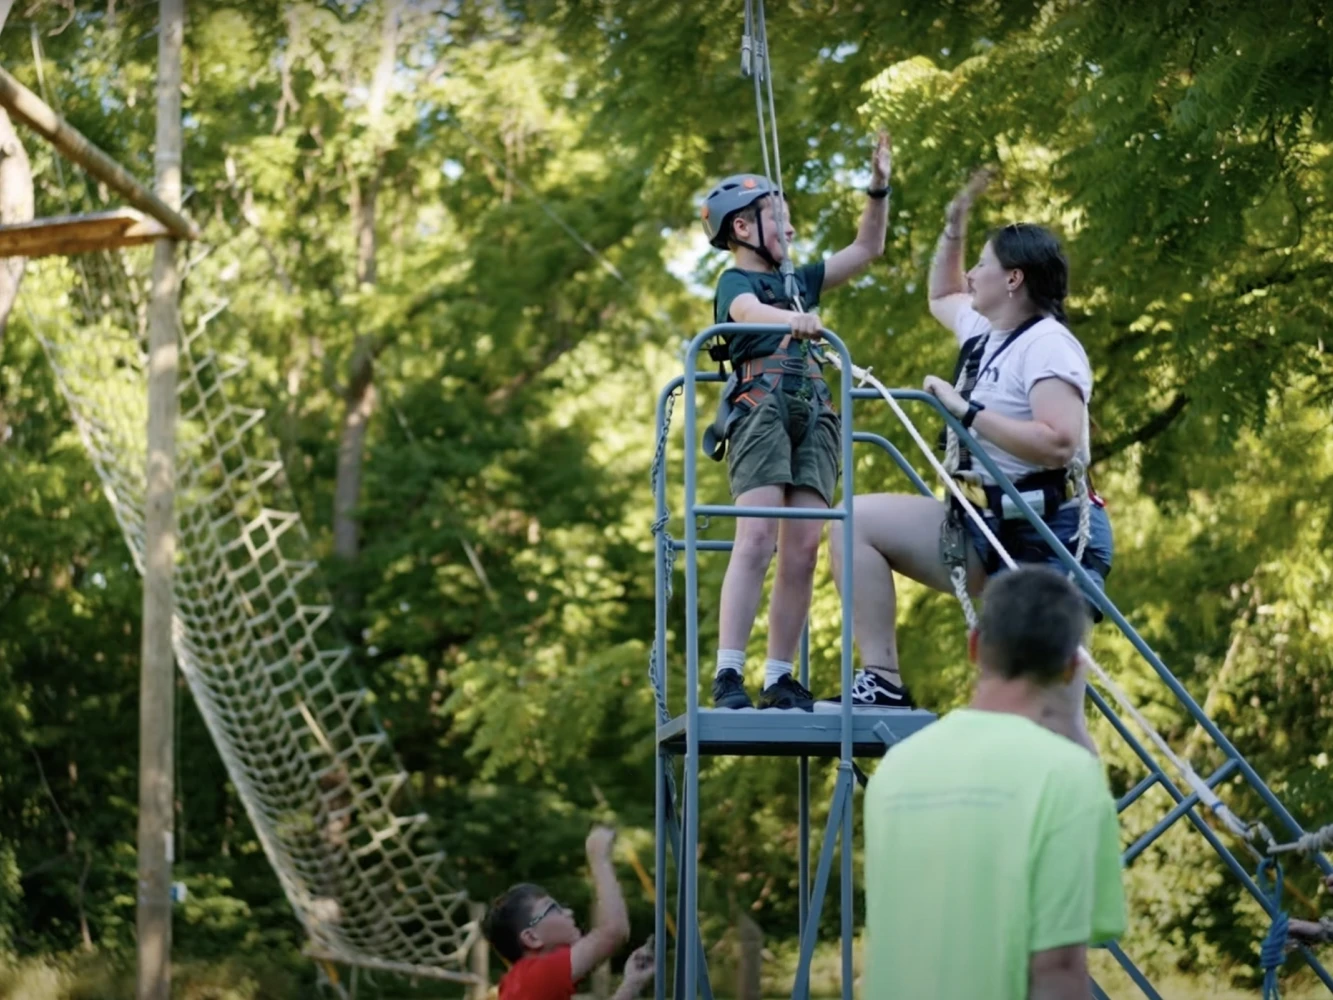 A Camp Accomplish camper and a Camp Accomplish counselor high fiving on the ropes course.